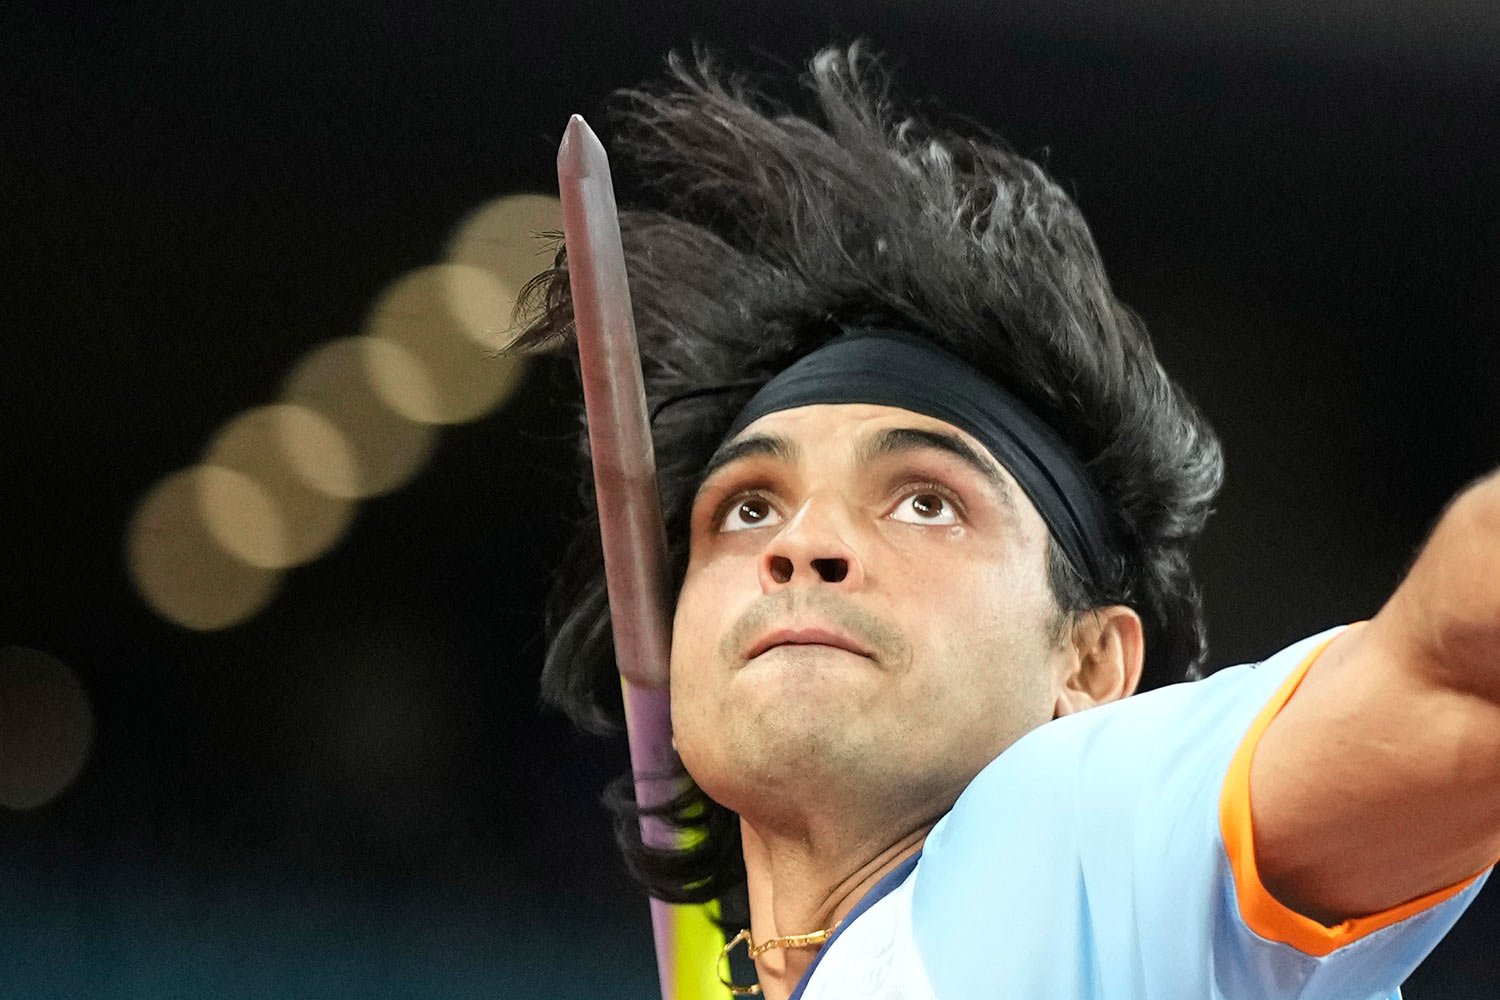  India's Neeraj Chopra competes during the men's javelin throw final at the 19th Asian Games in Hangzhou, China, Wednesday, Oct. 4, 2023. (AP Photo/Lee Jin-man) 